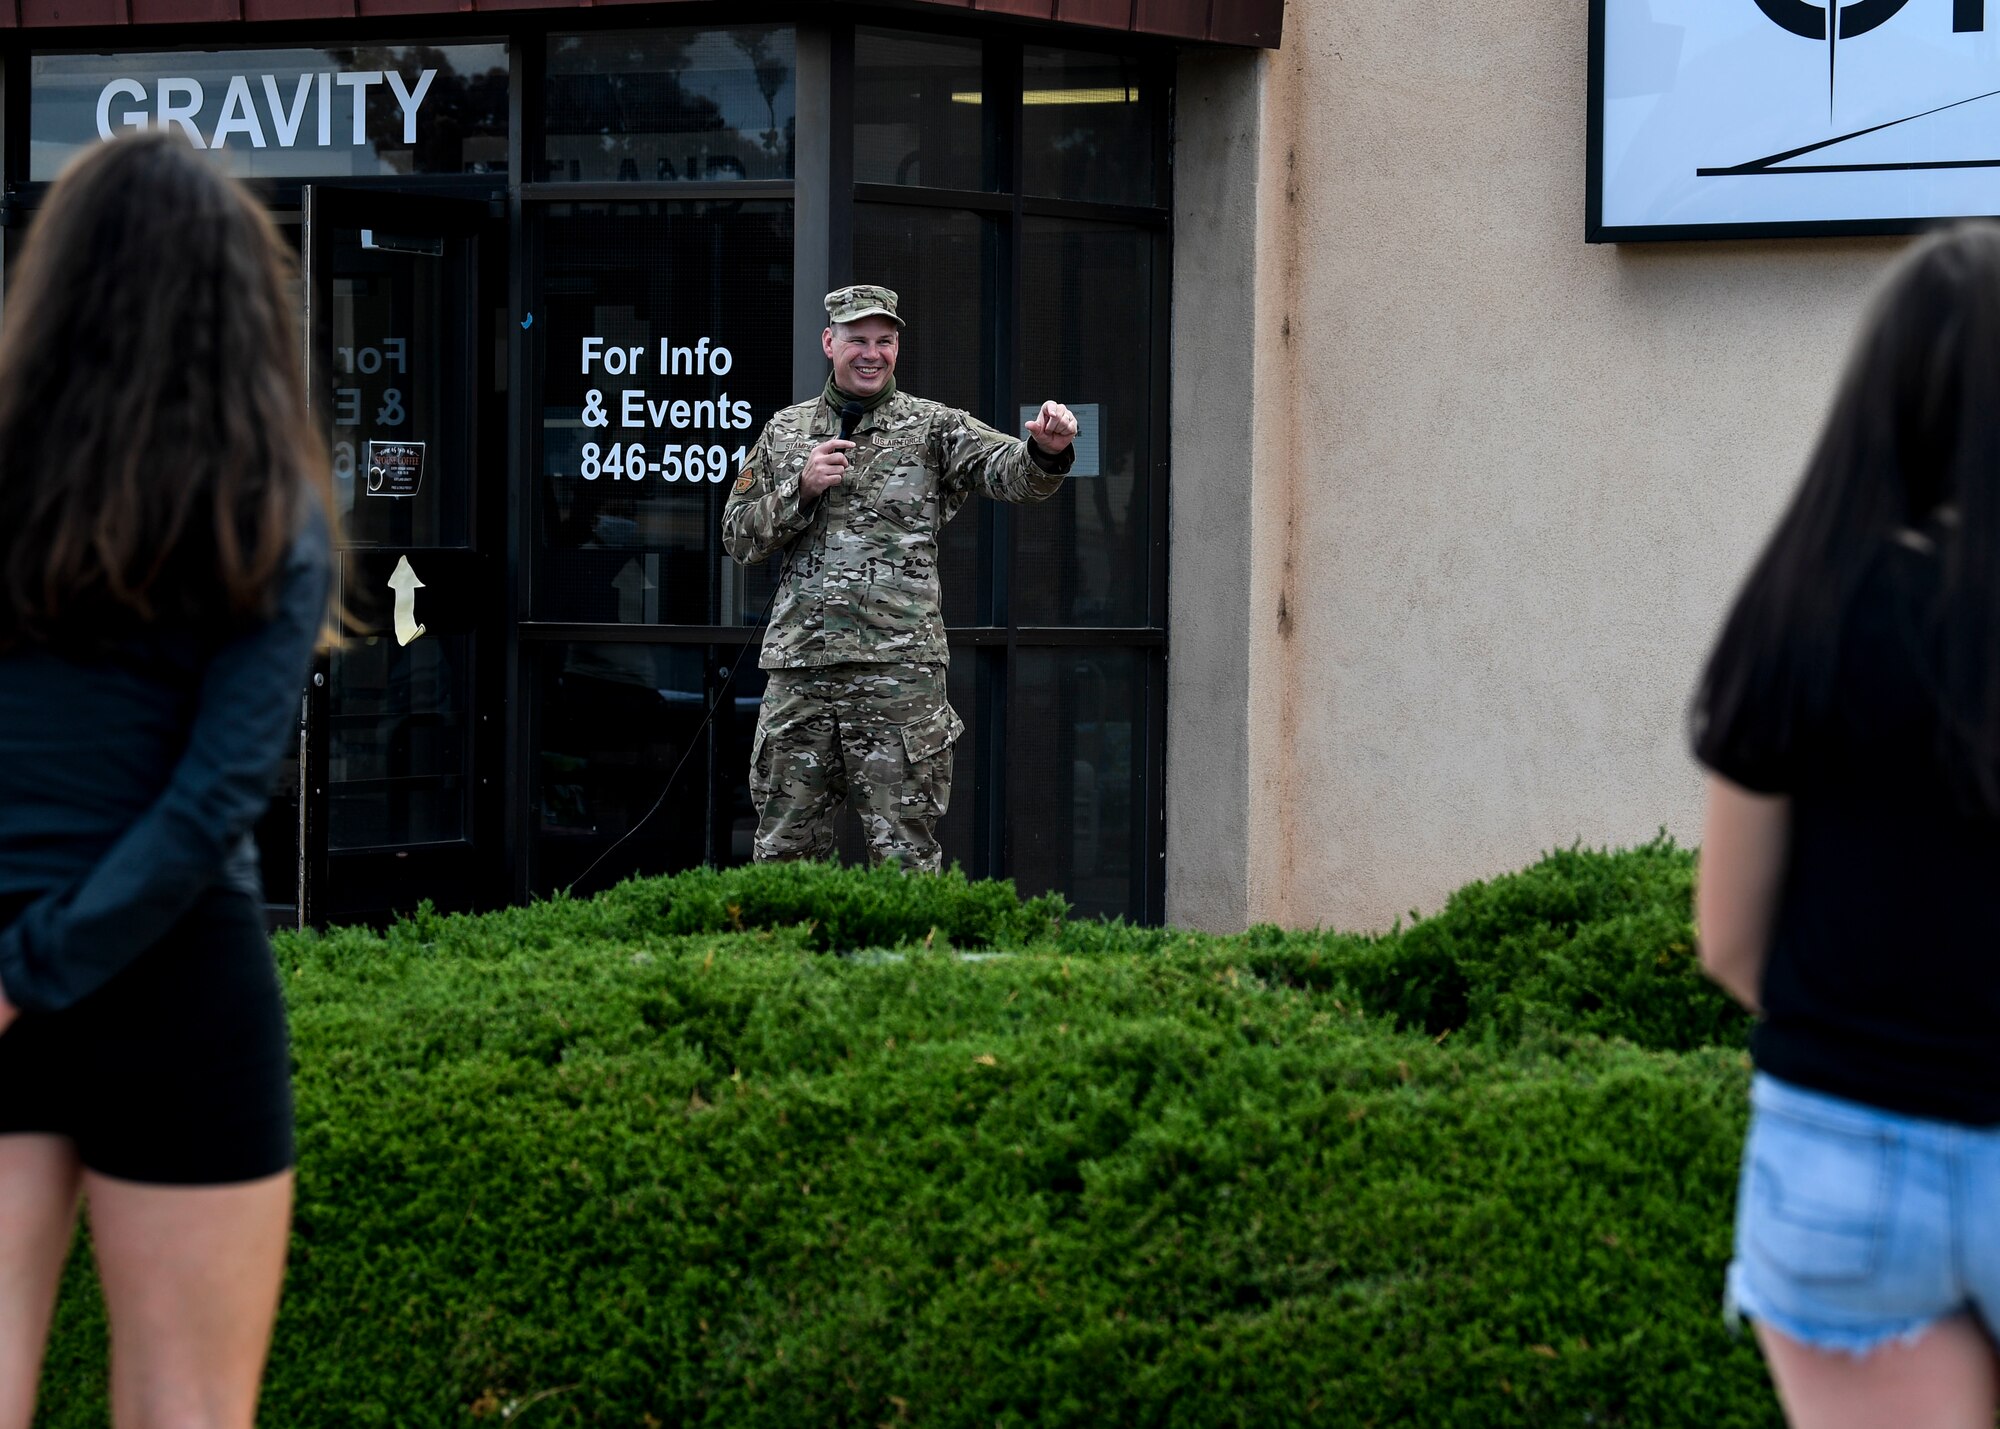 U.S. Air Force Chief Master Sgt. Robert W. Stamper, 377 Air Base Wing command chief, speaks to Airmen.